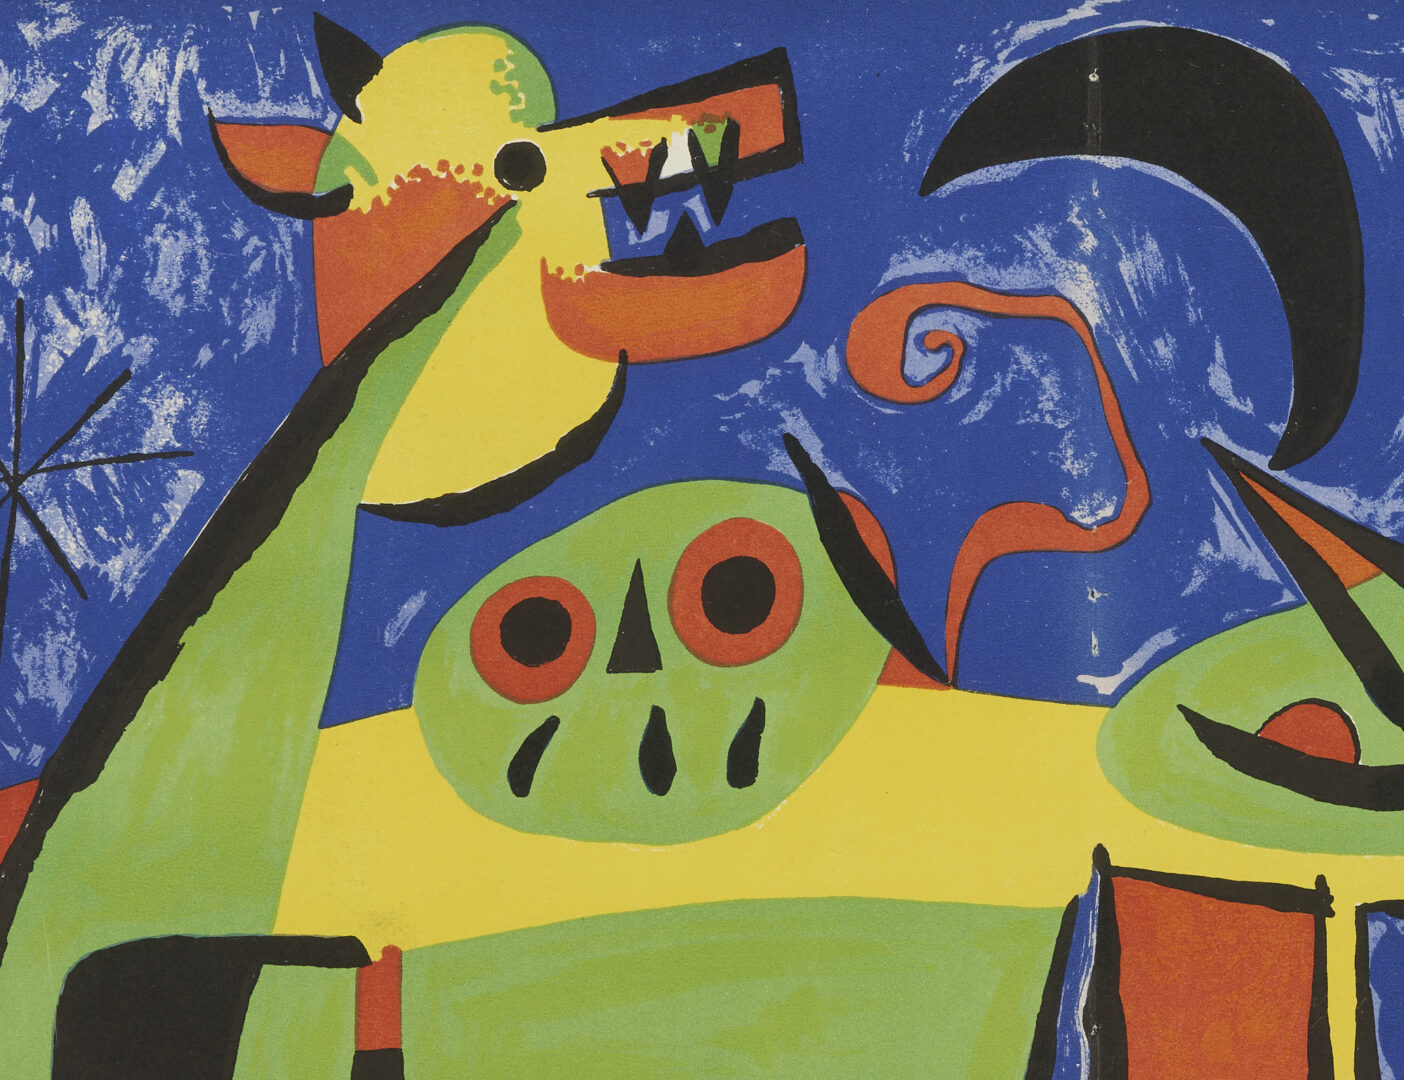 Lot 444: Joan Miro Lithograph, The Dog Barking at Moon, 1952, for Verve